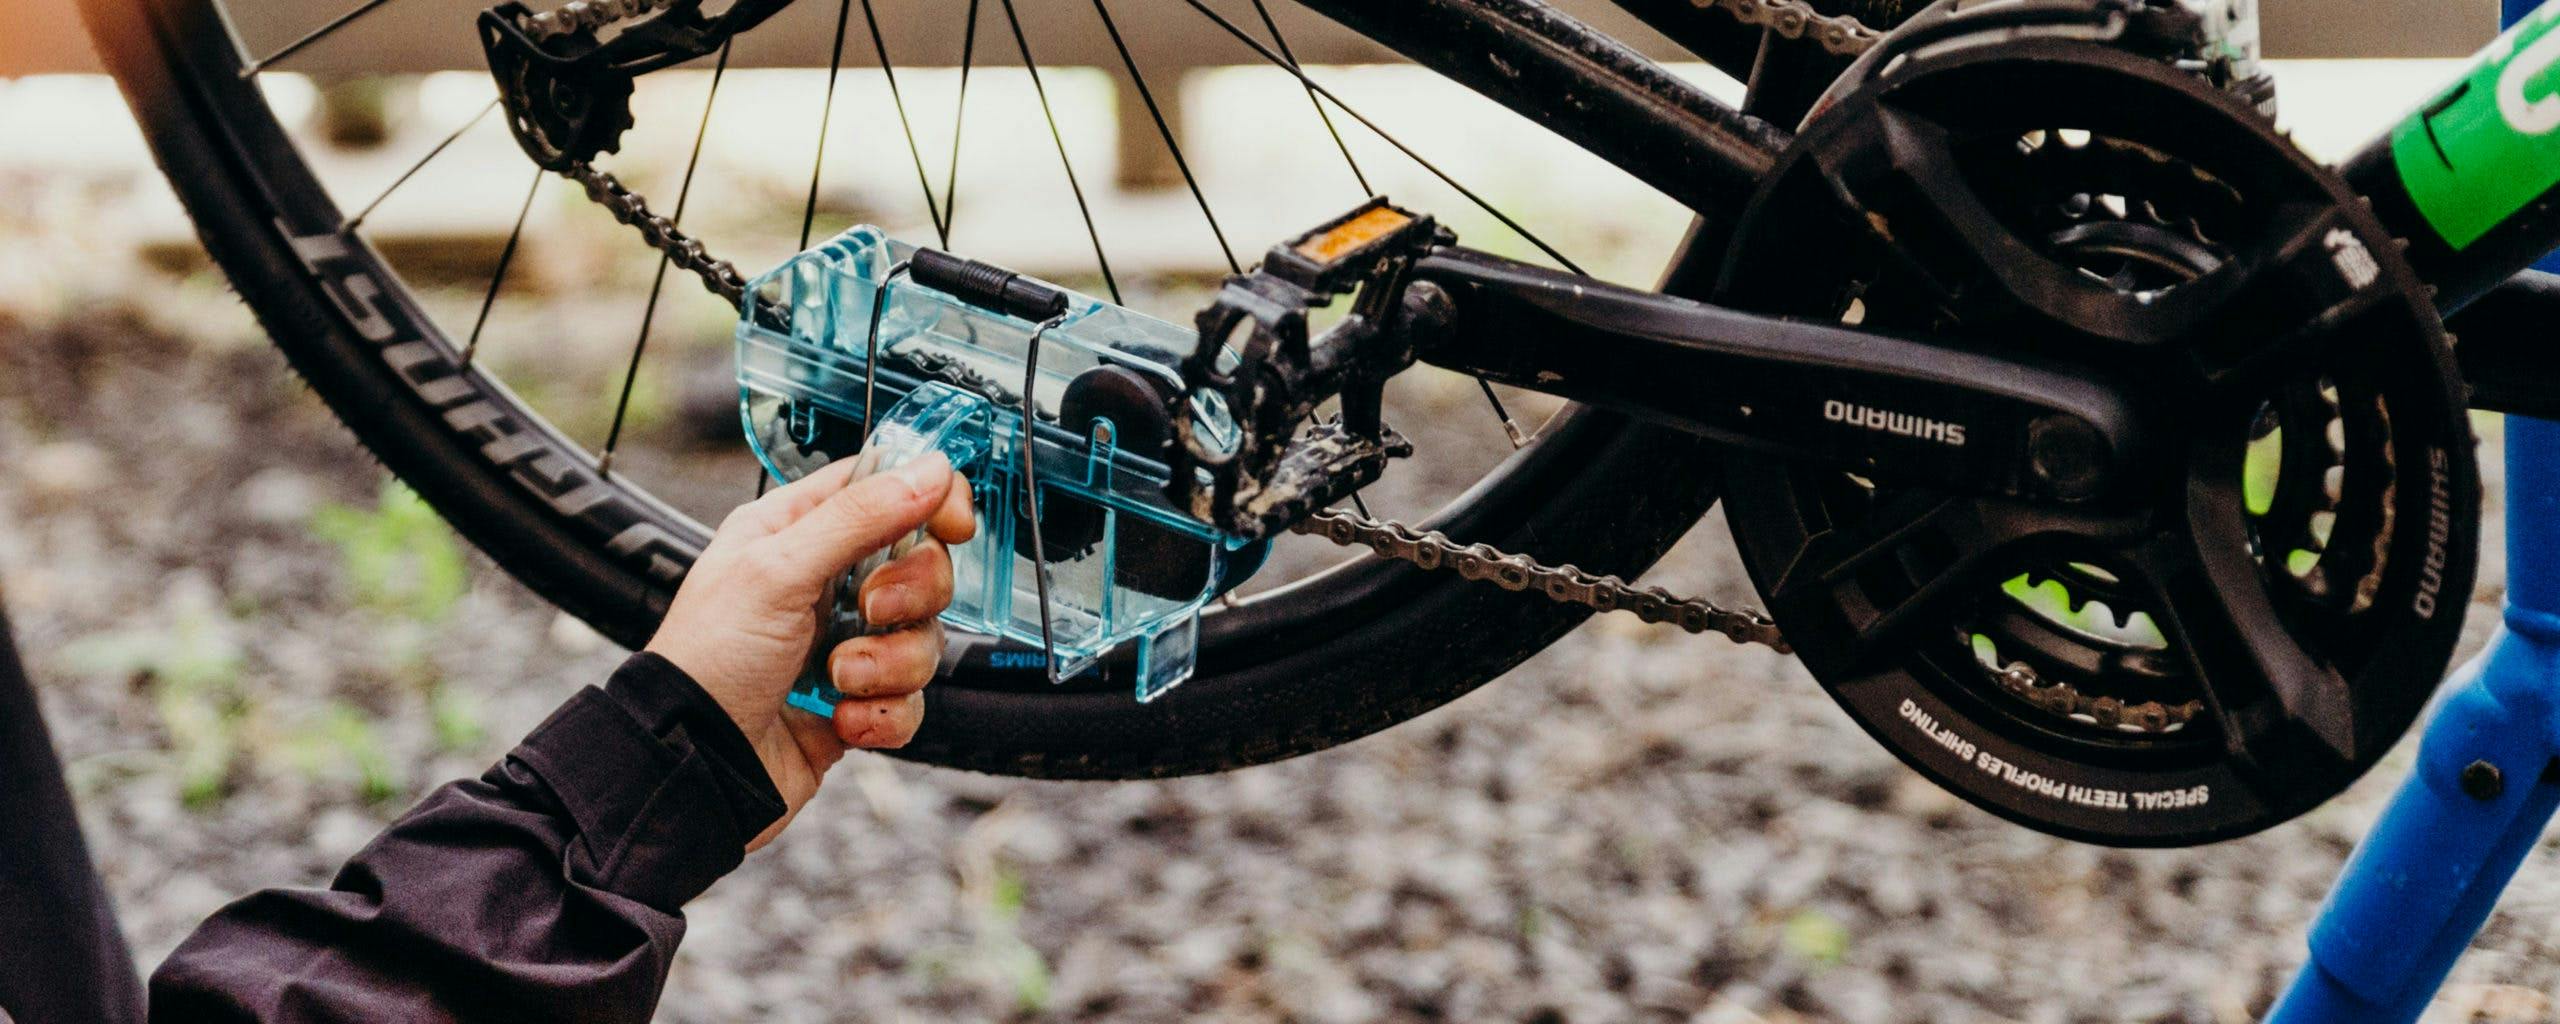 How to clean and lube a bike chain